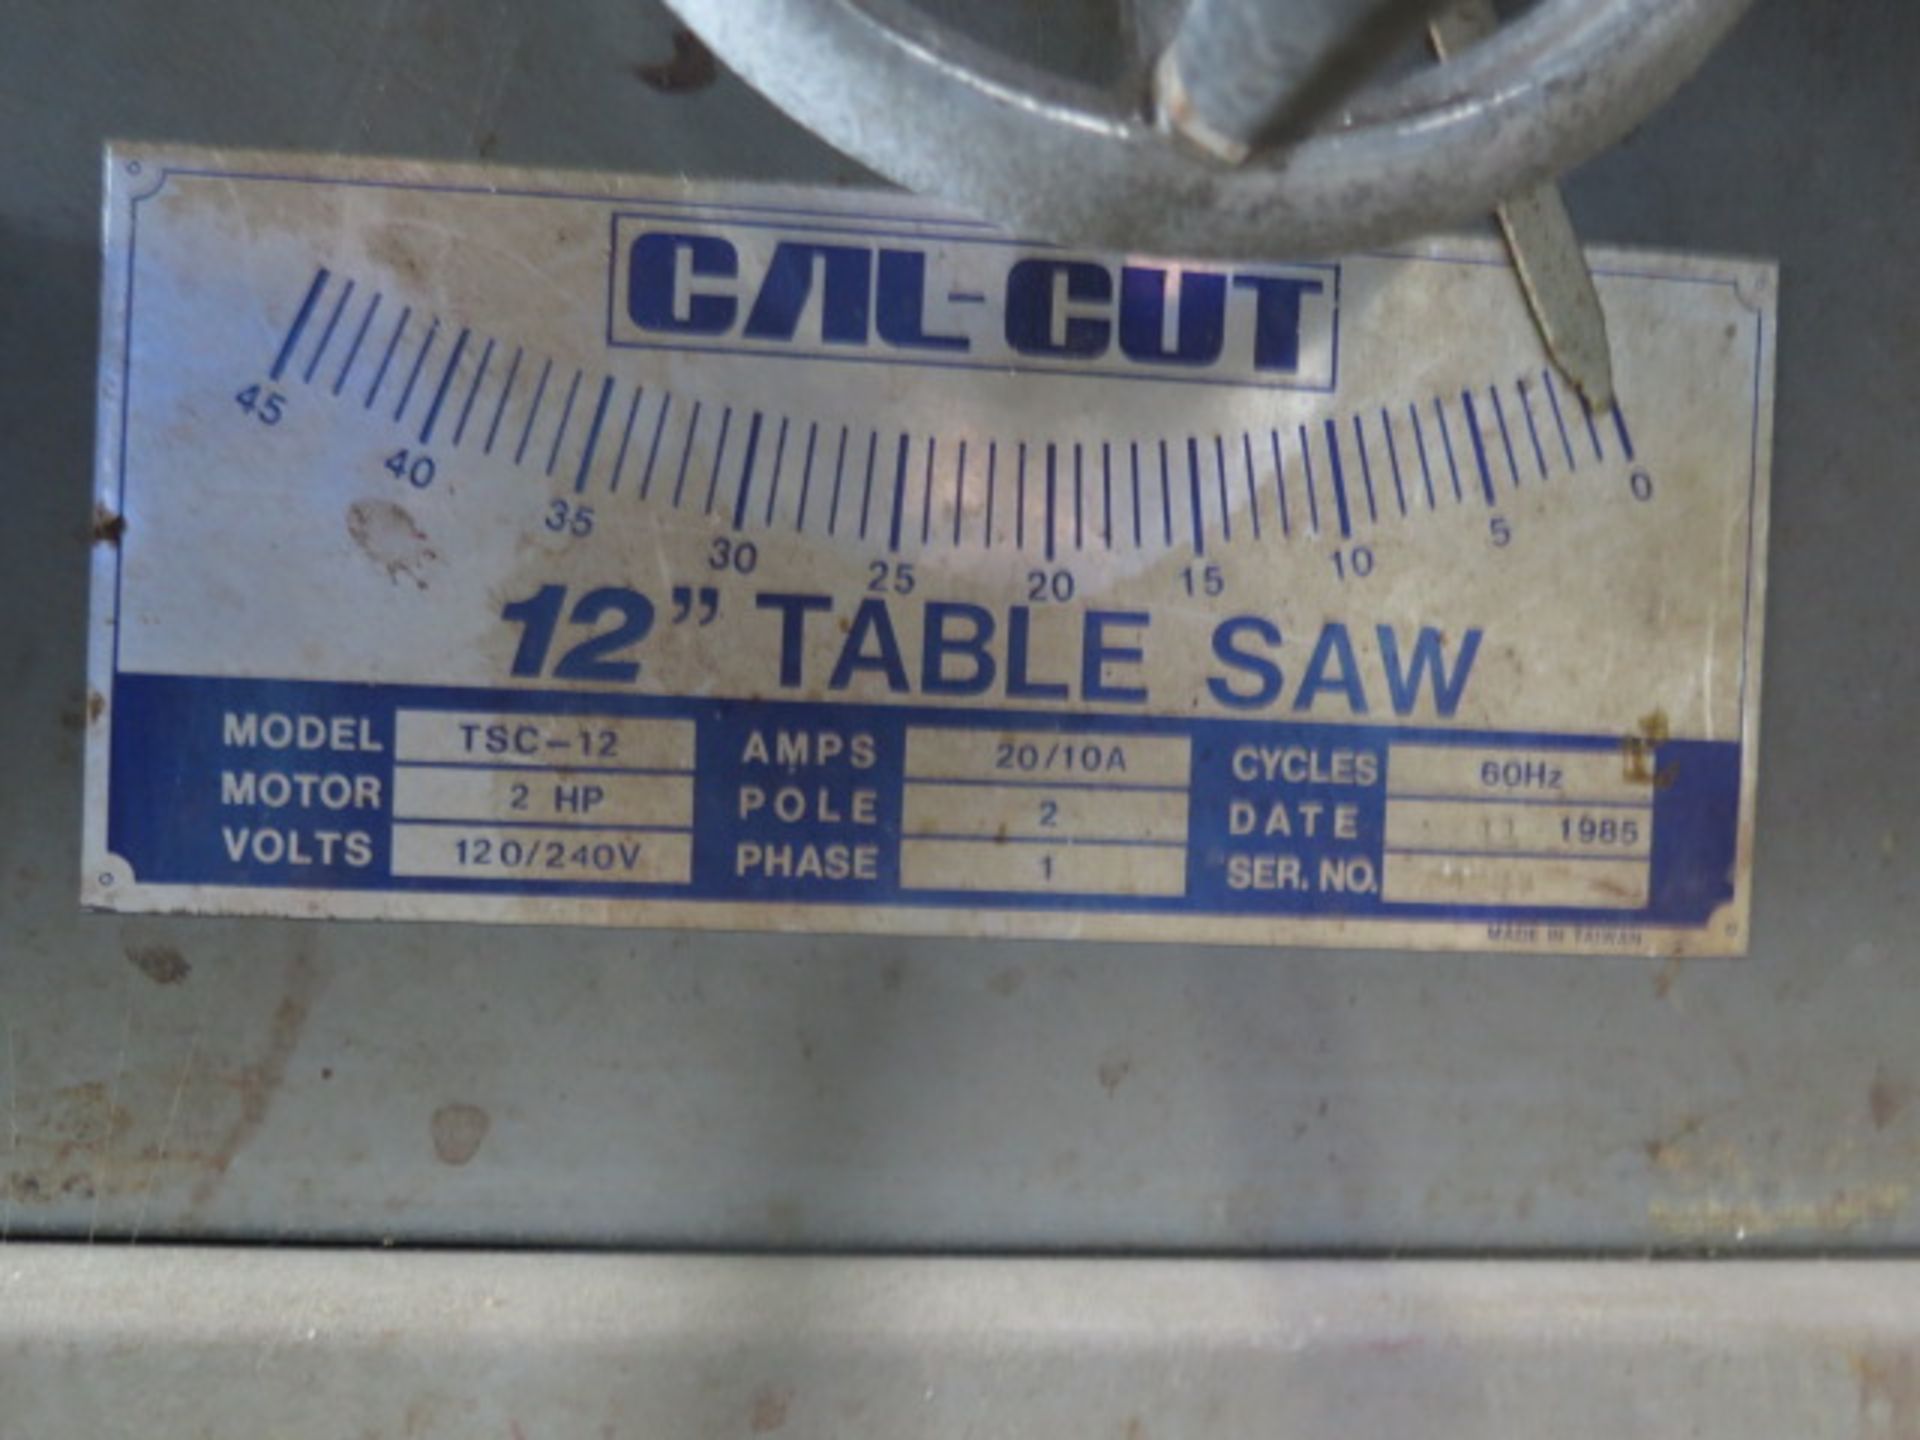 Cal-Cut 12" Table Saw w/ Fence System (SOLD AS-IS - NO WARRANTY) - Image 7 of 7